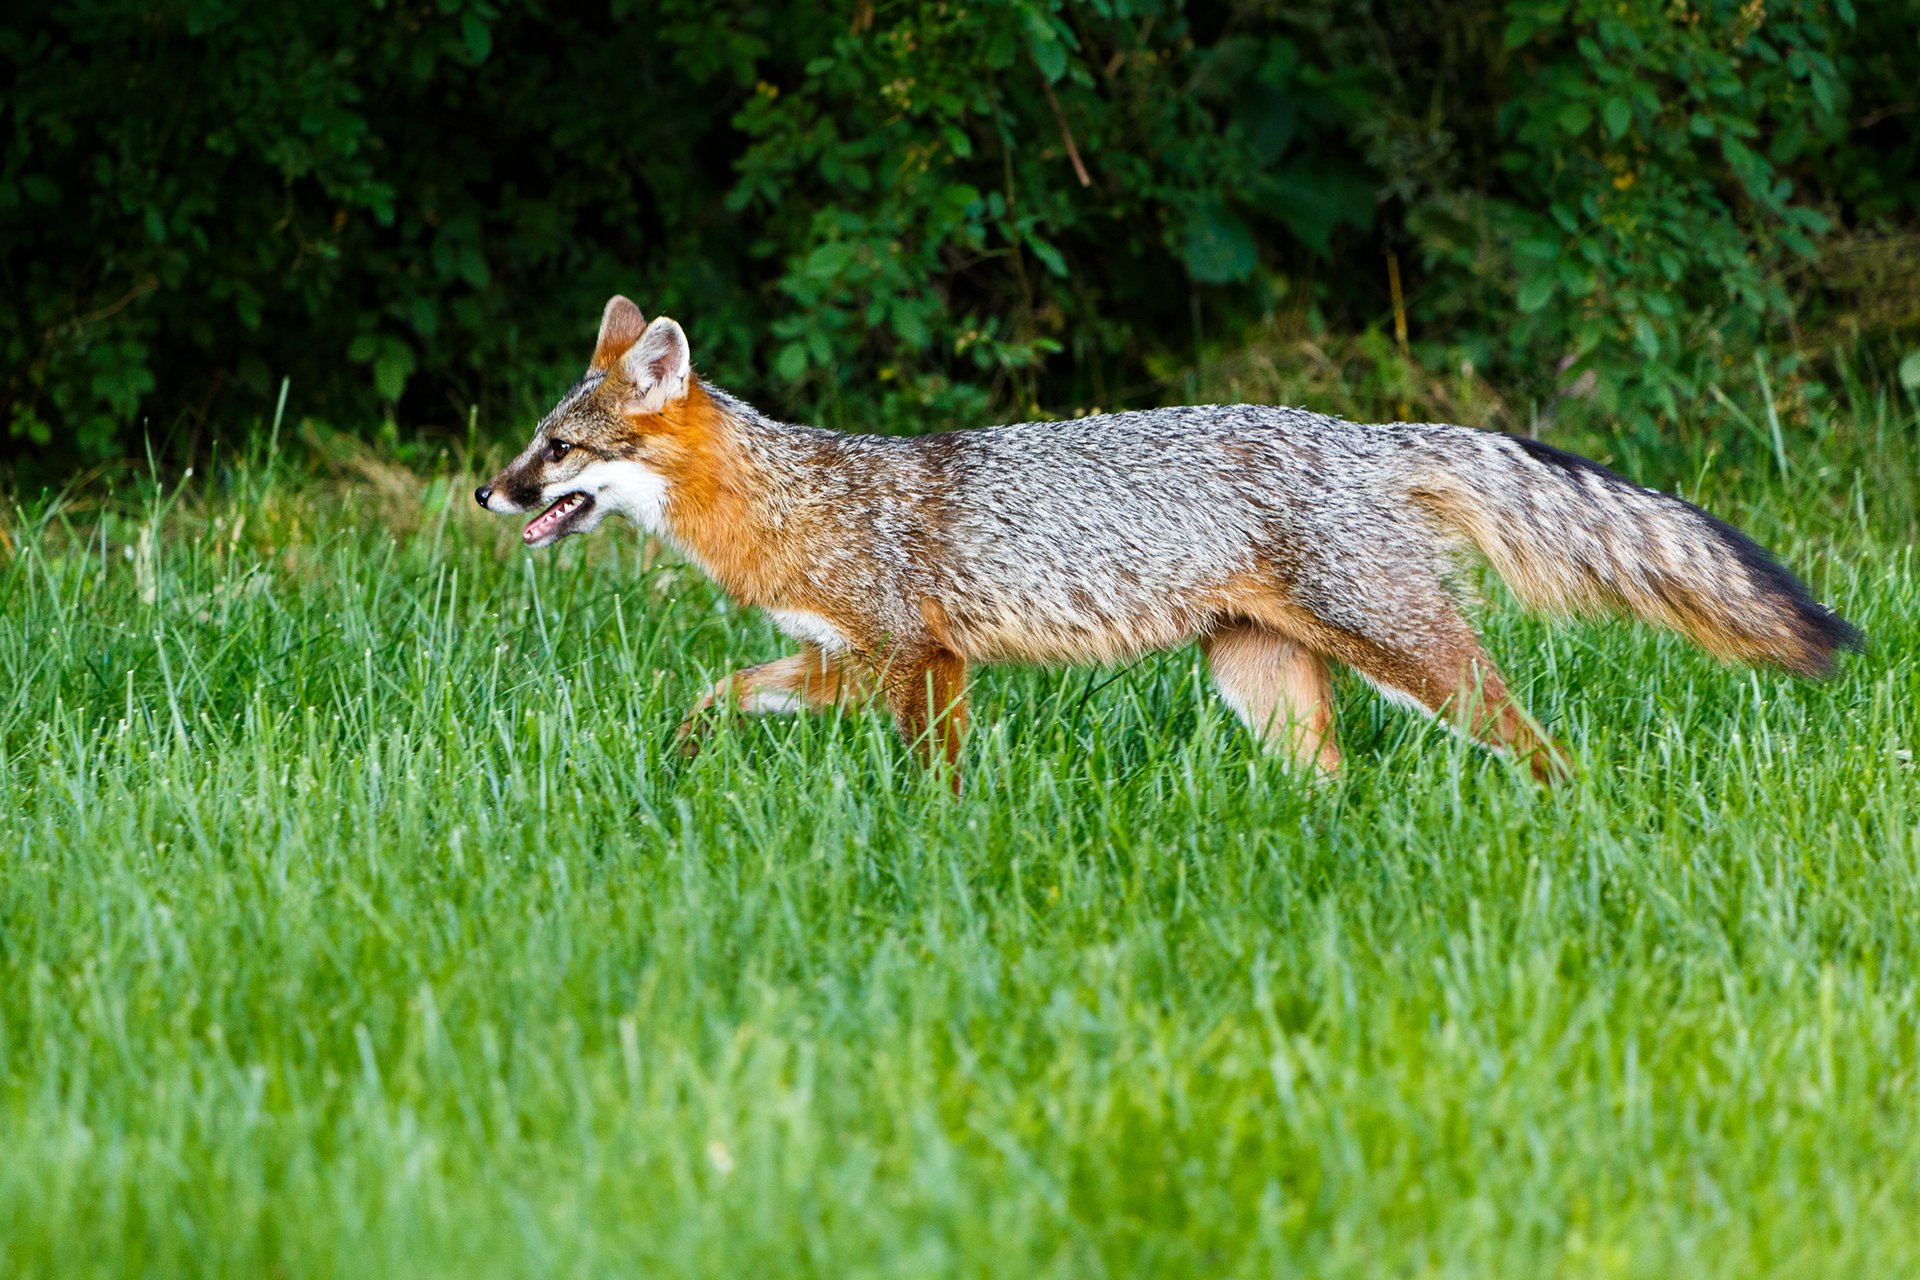 Profile of Gray Fox walking in the grass